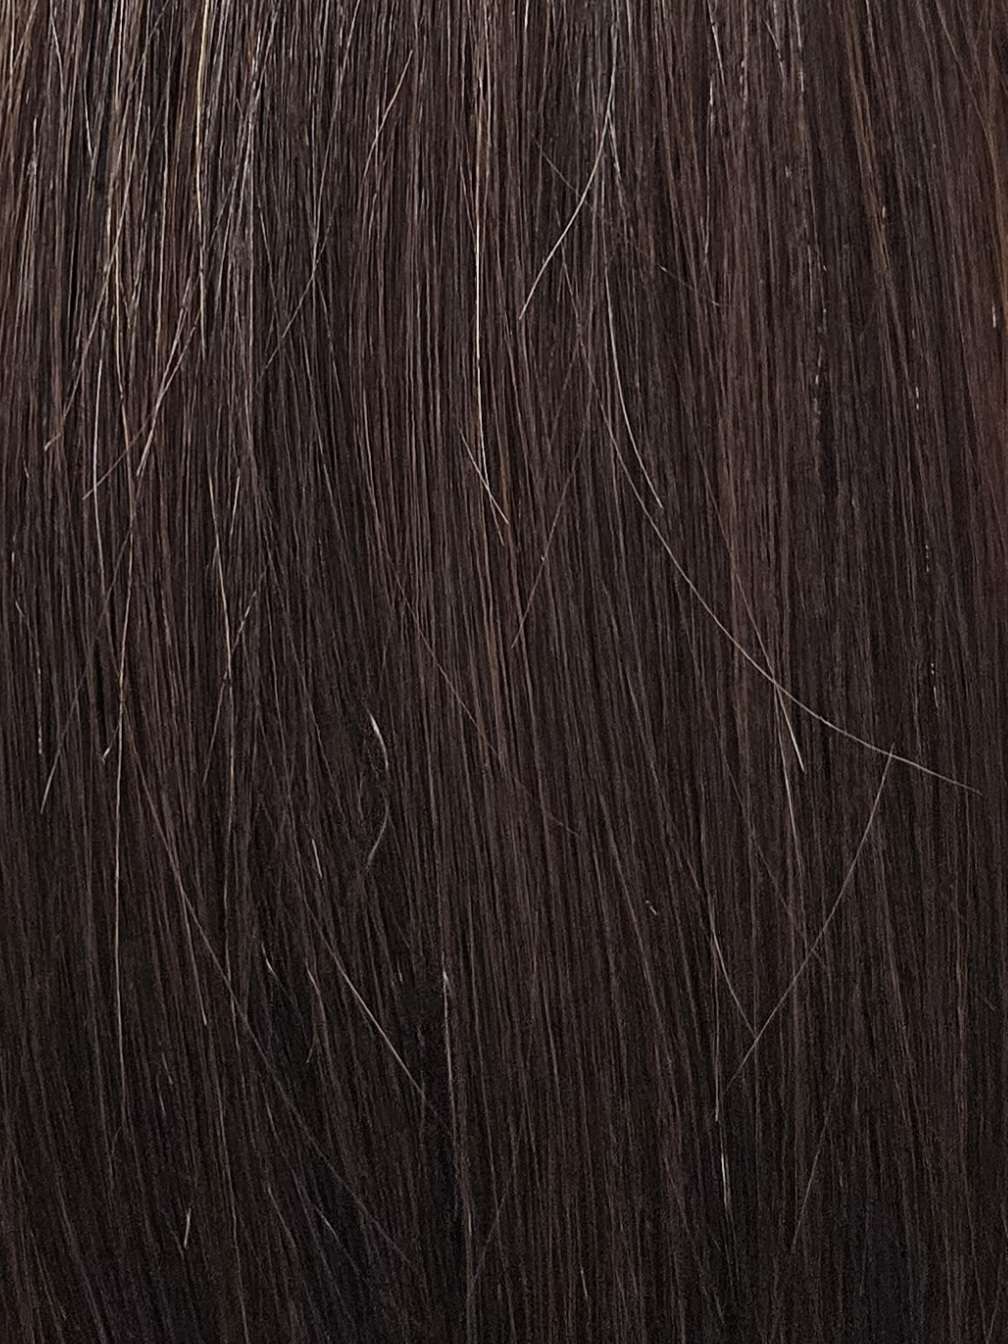 Pyra - 100% Remy Human Hair Extensions